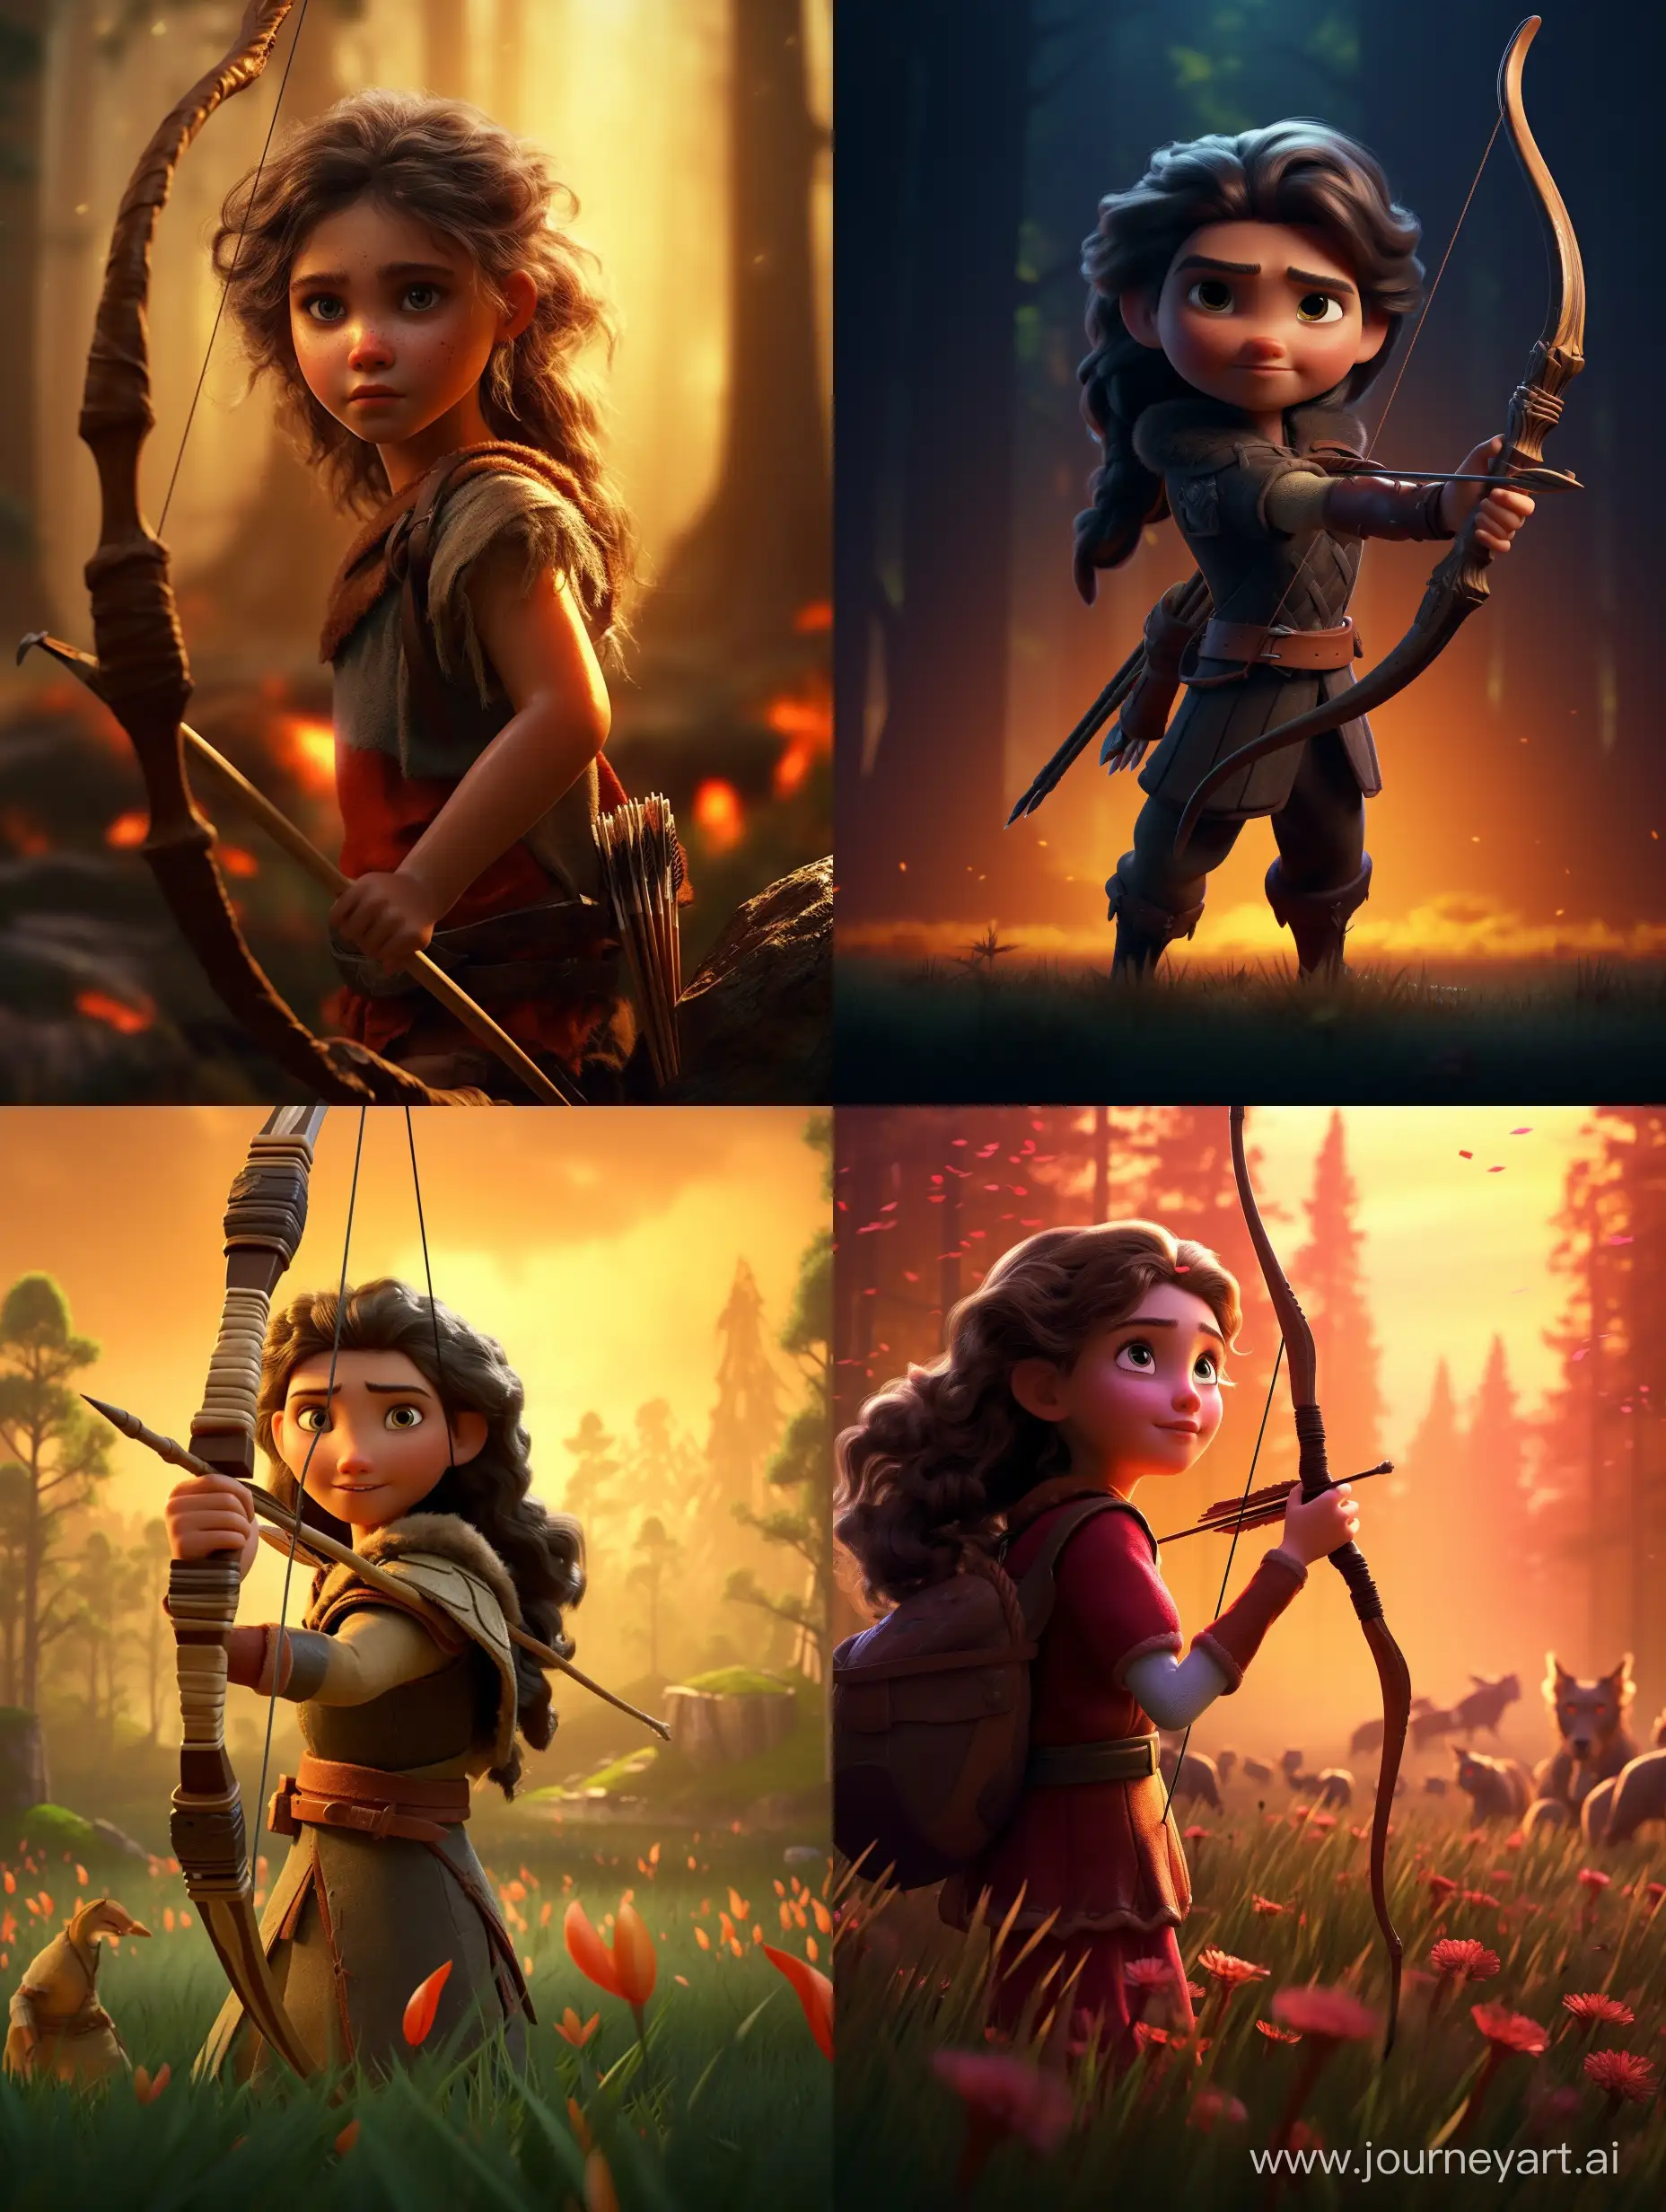 Long ago, people hunted with bows and arrows. Pixar style